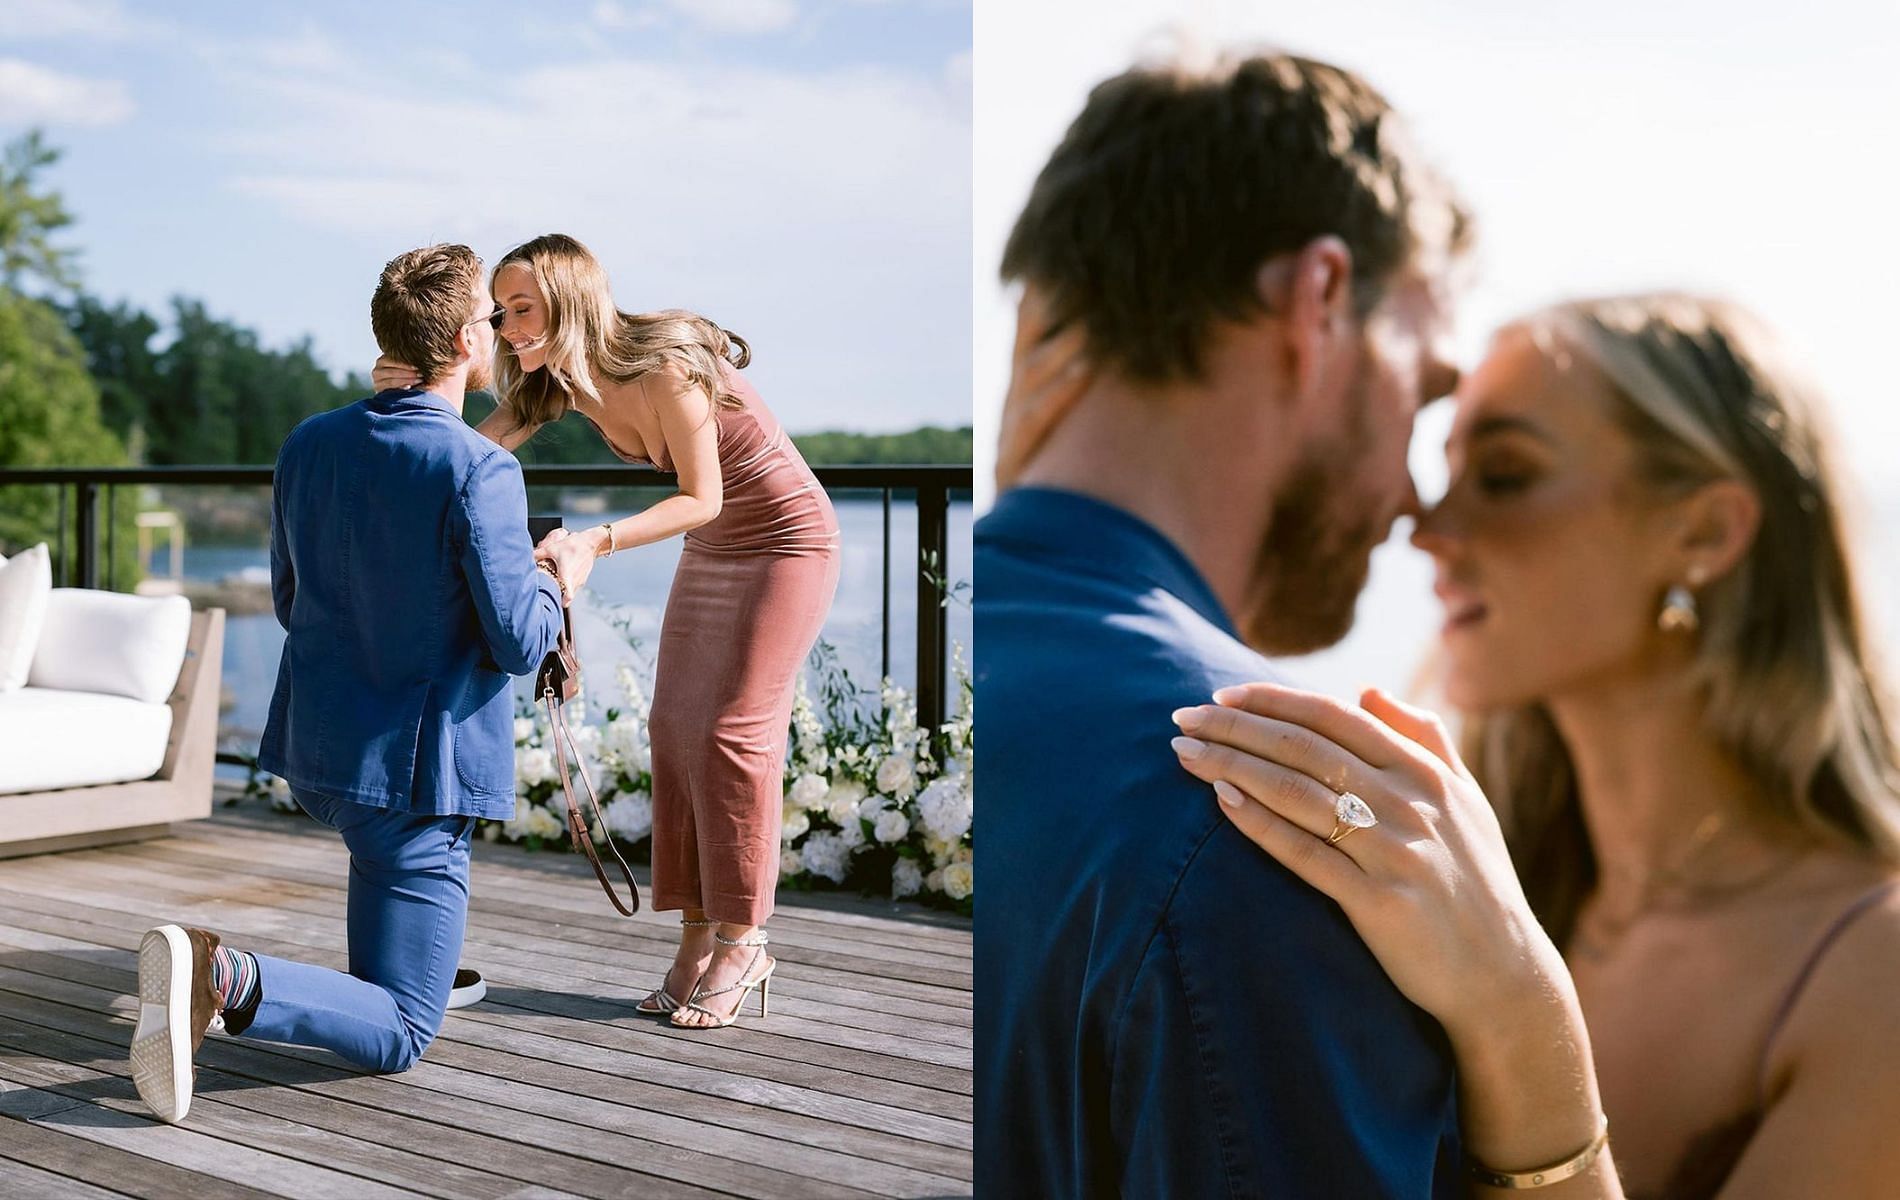 Connor McDavid gets engaged to longtime girlfriend, Lauren Kyle